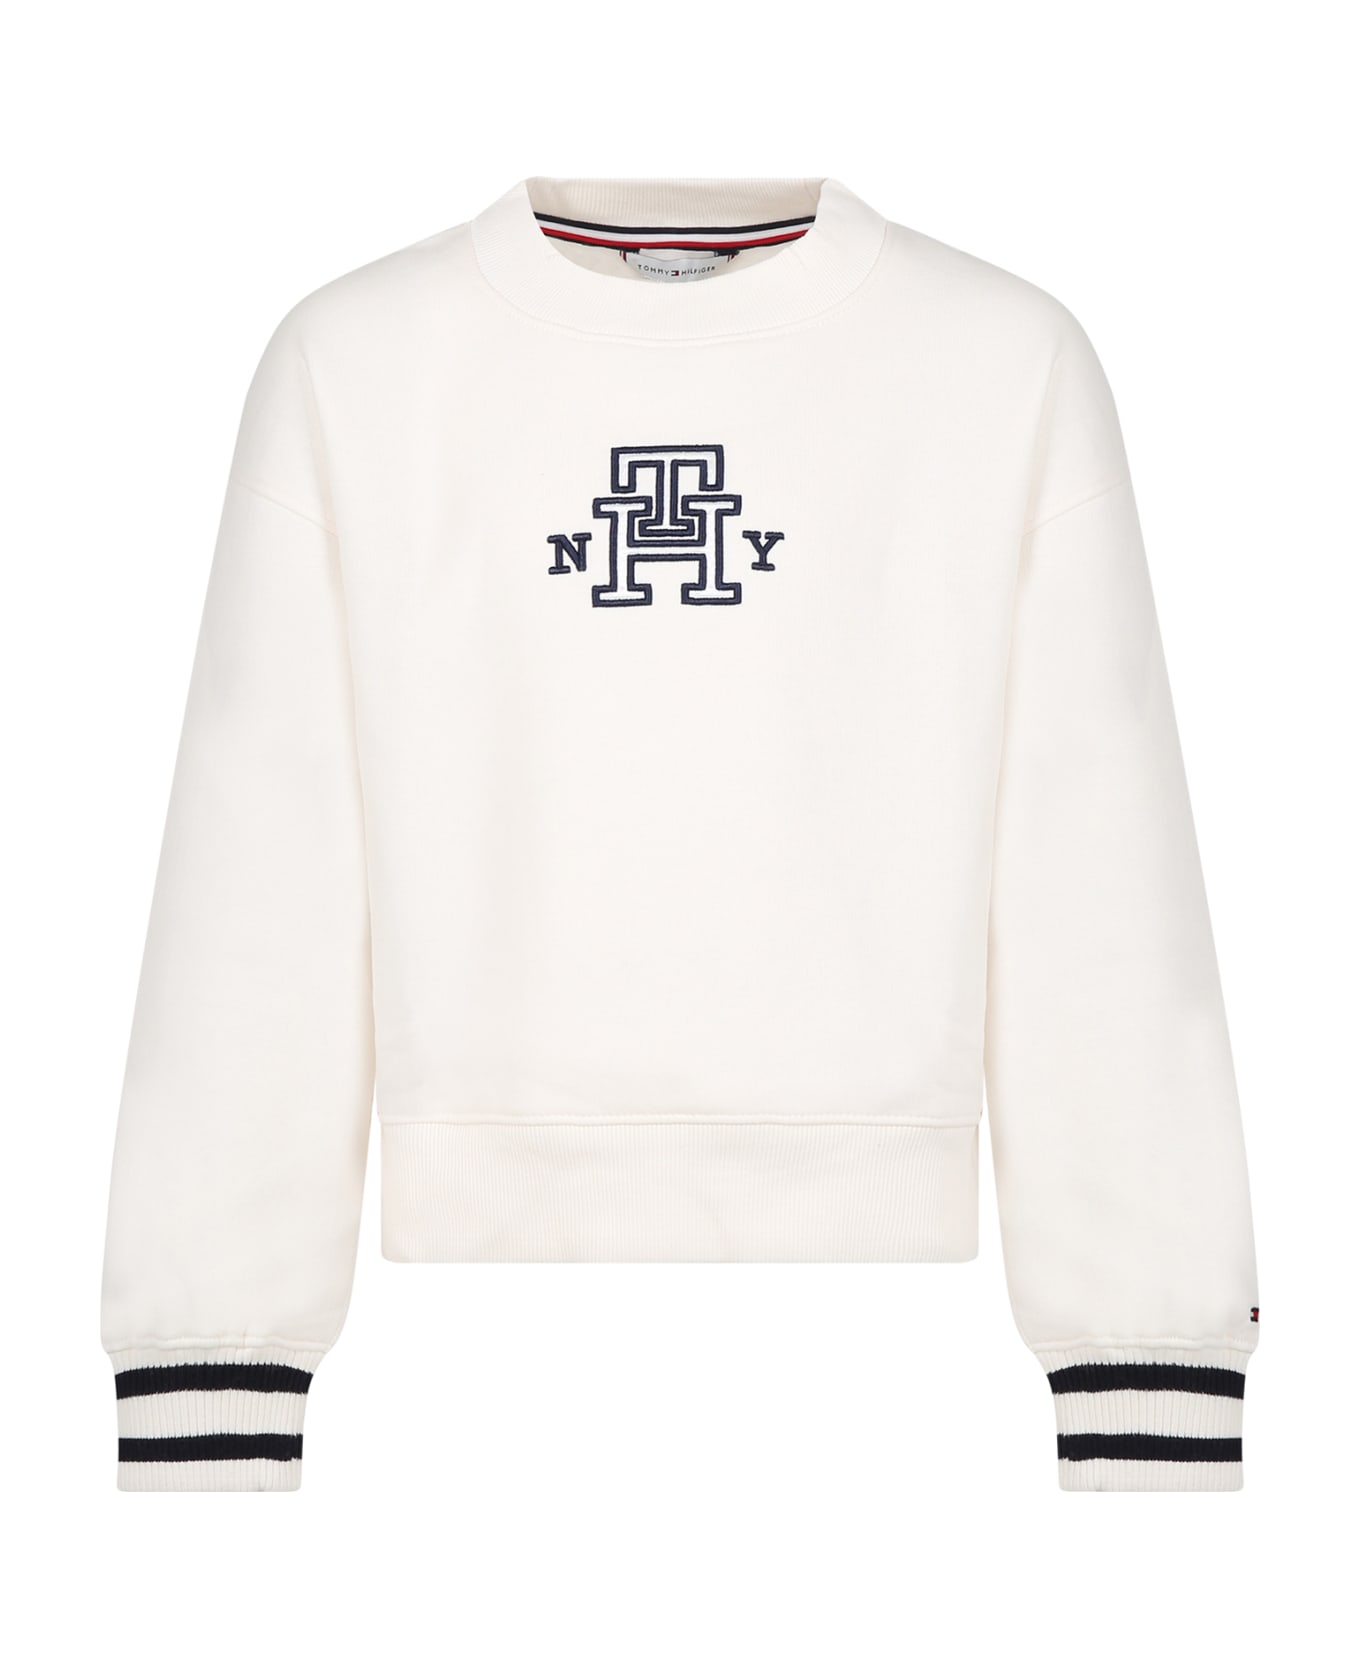 Tommy Hilfiger Ivory Sweatshirt For Girl With Logo - Ivory